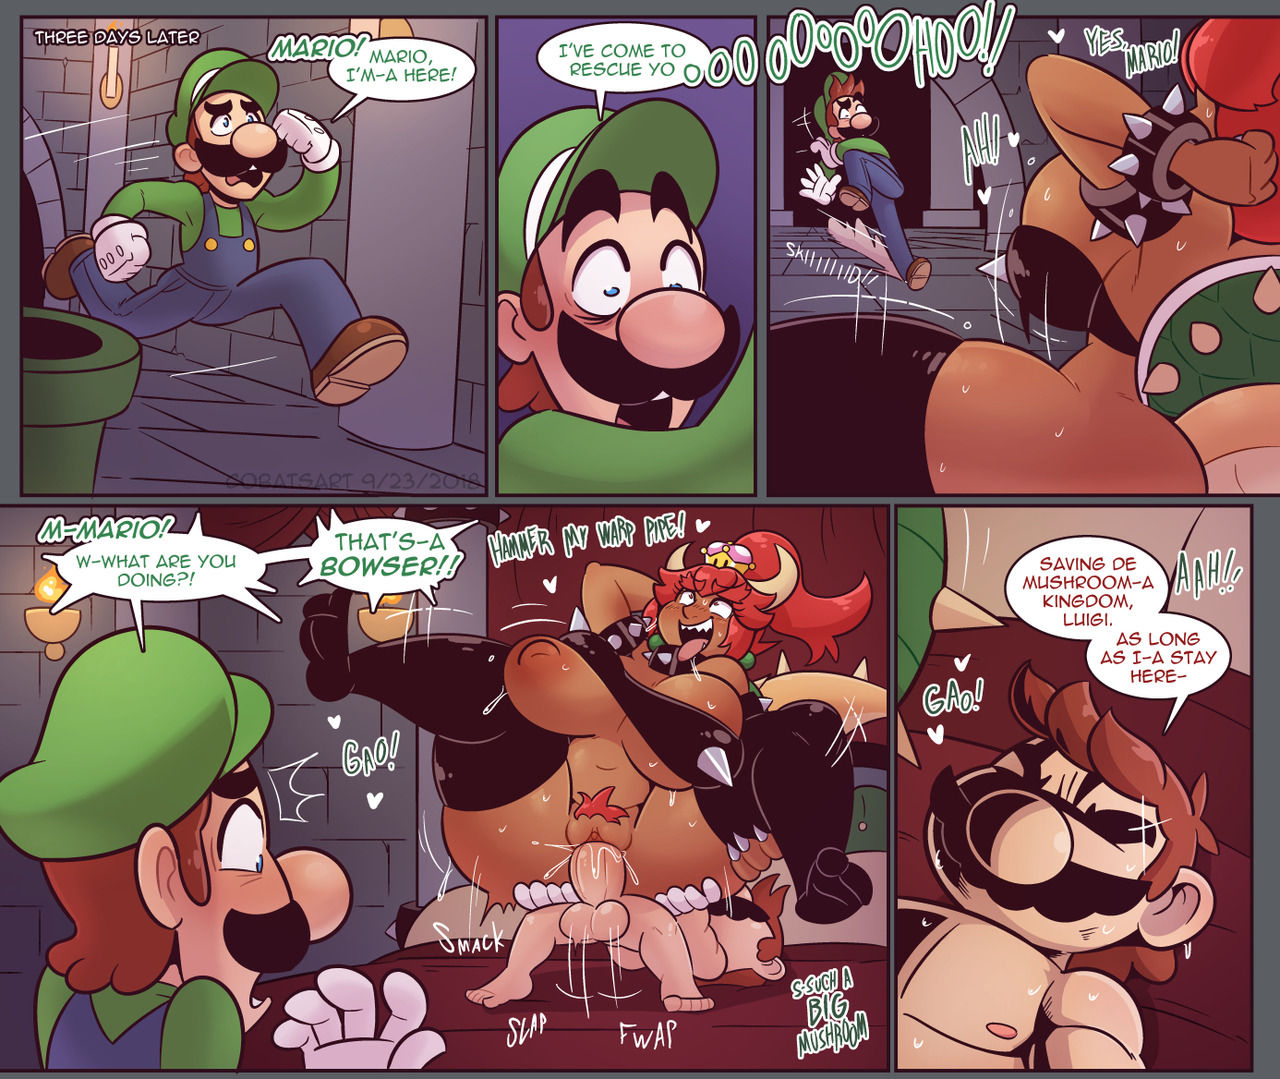 A Night of Browsette - Super Mario Bros (Cobat) page 2